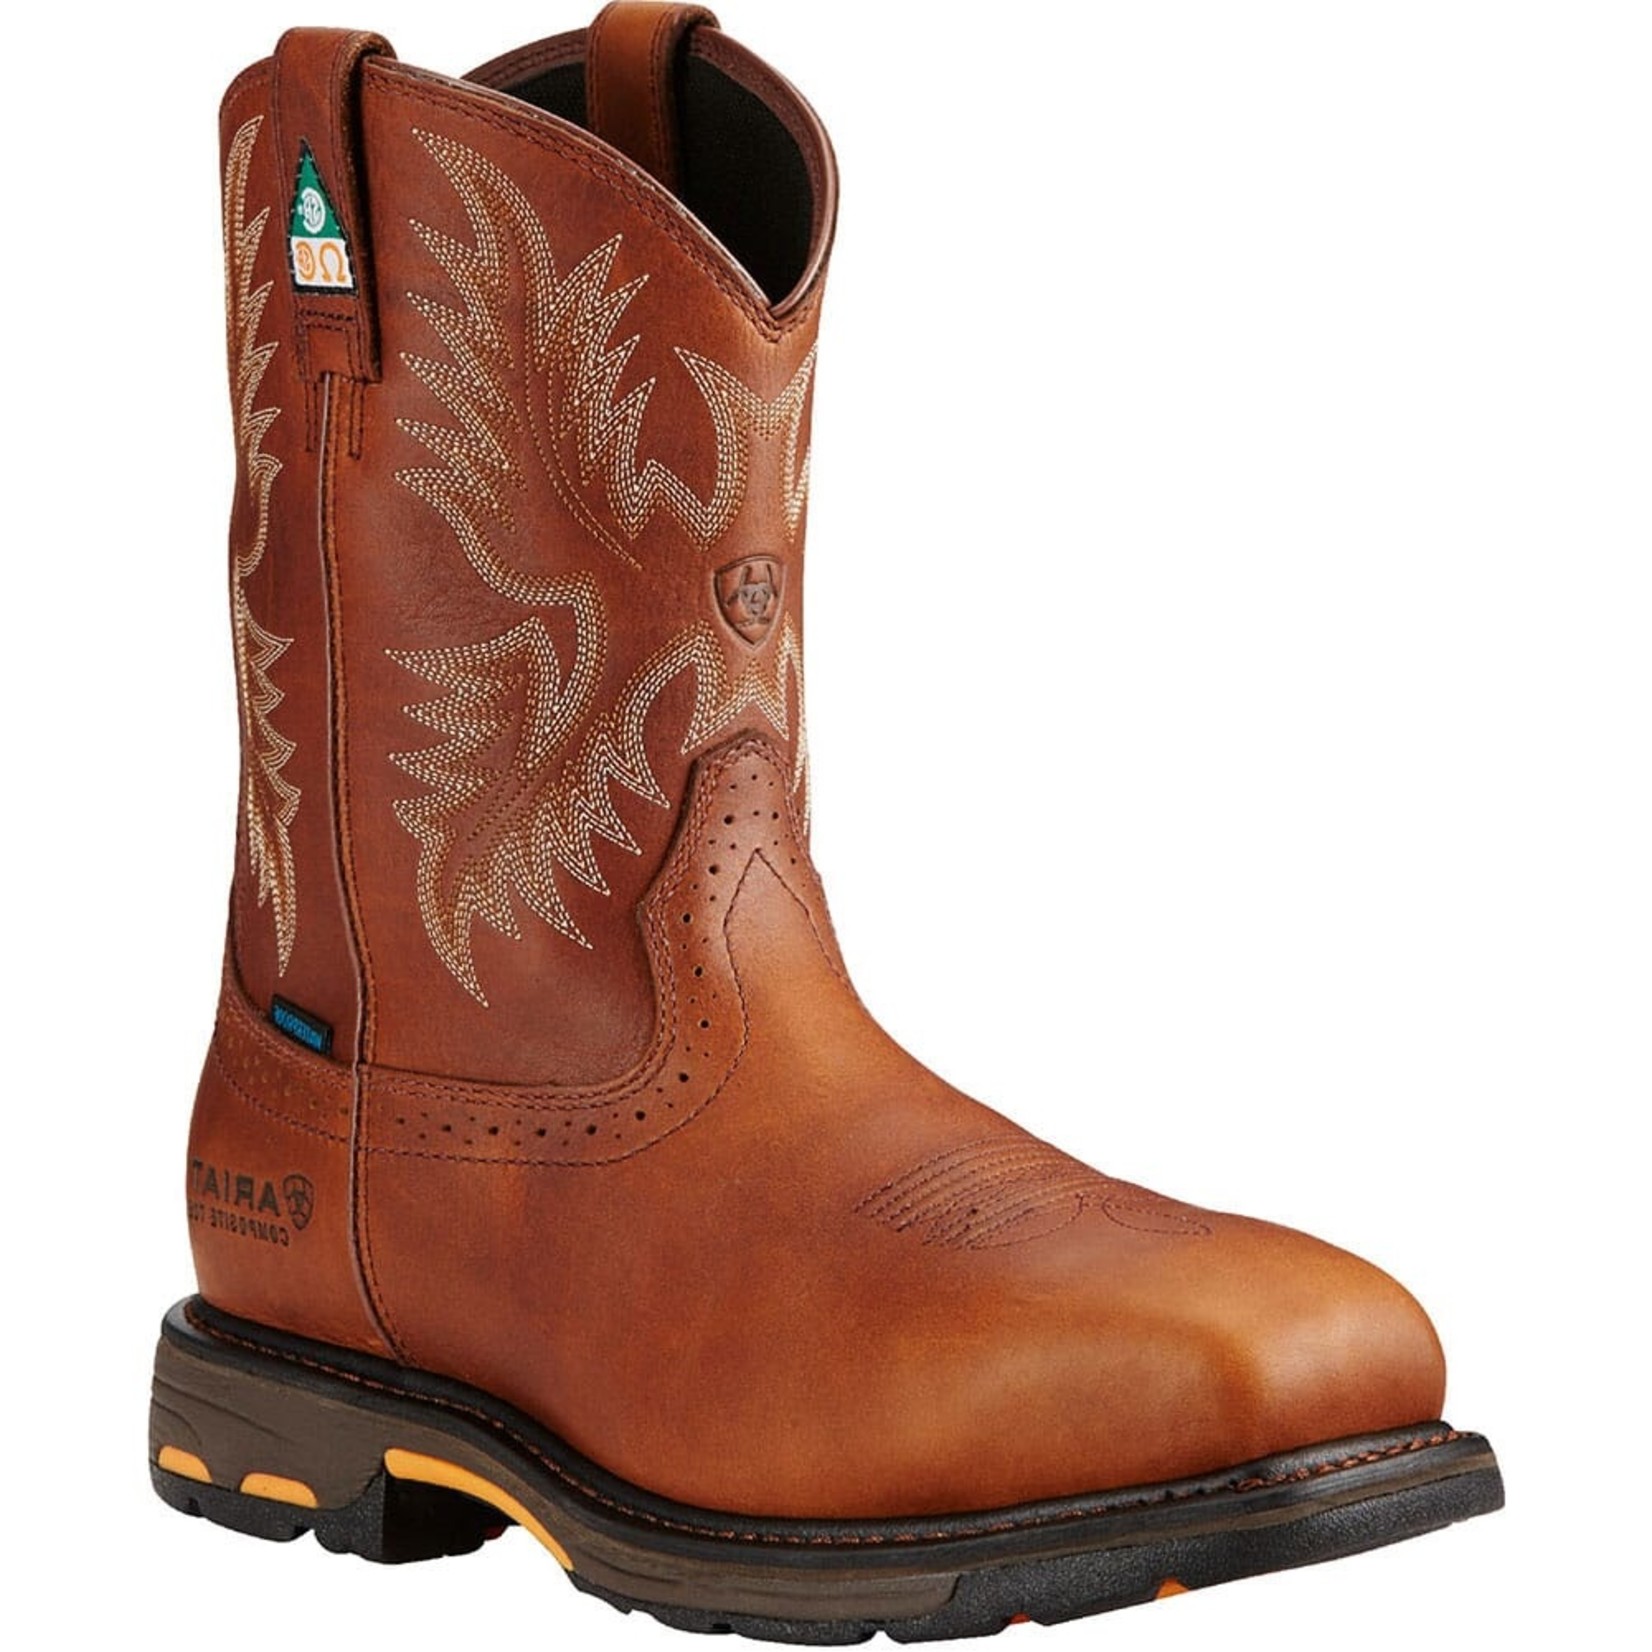 Ariat Men's Ariat Safety Toe Waterproof Workhog CSA Approved 10017175